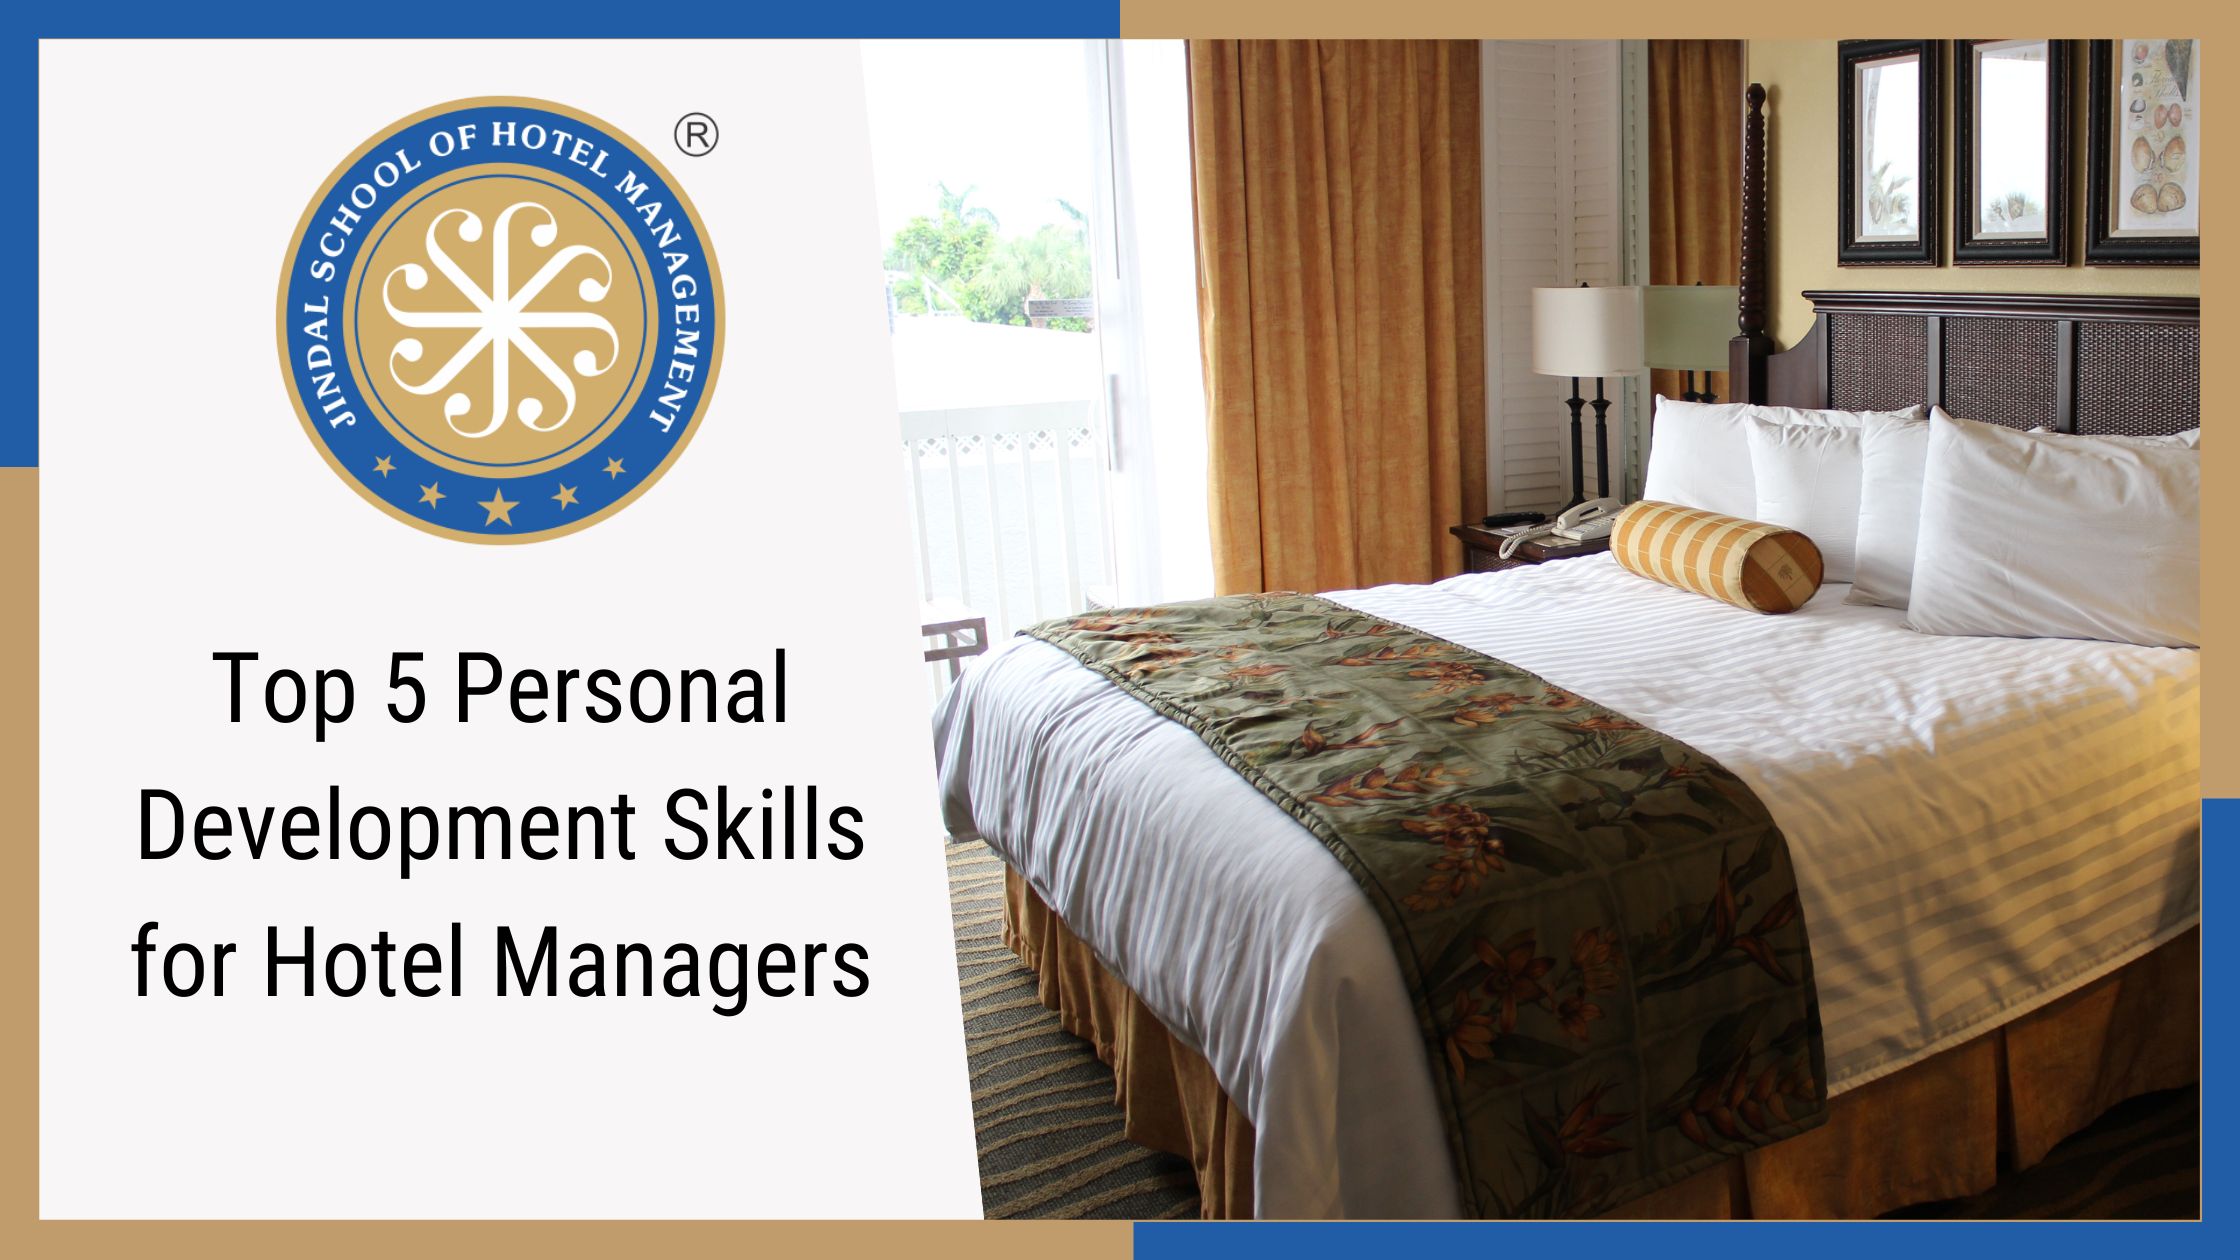 Top 5 Personal Development Skills for Hotel Managers